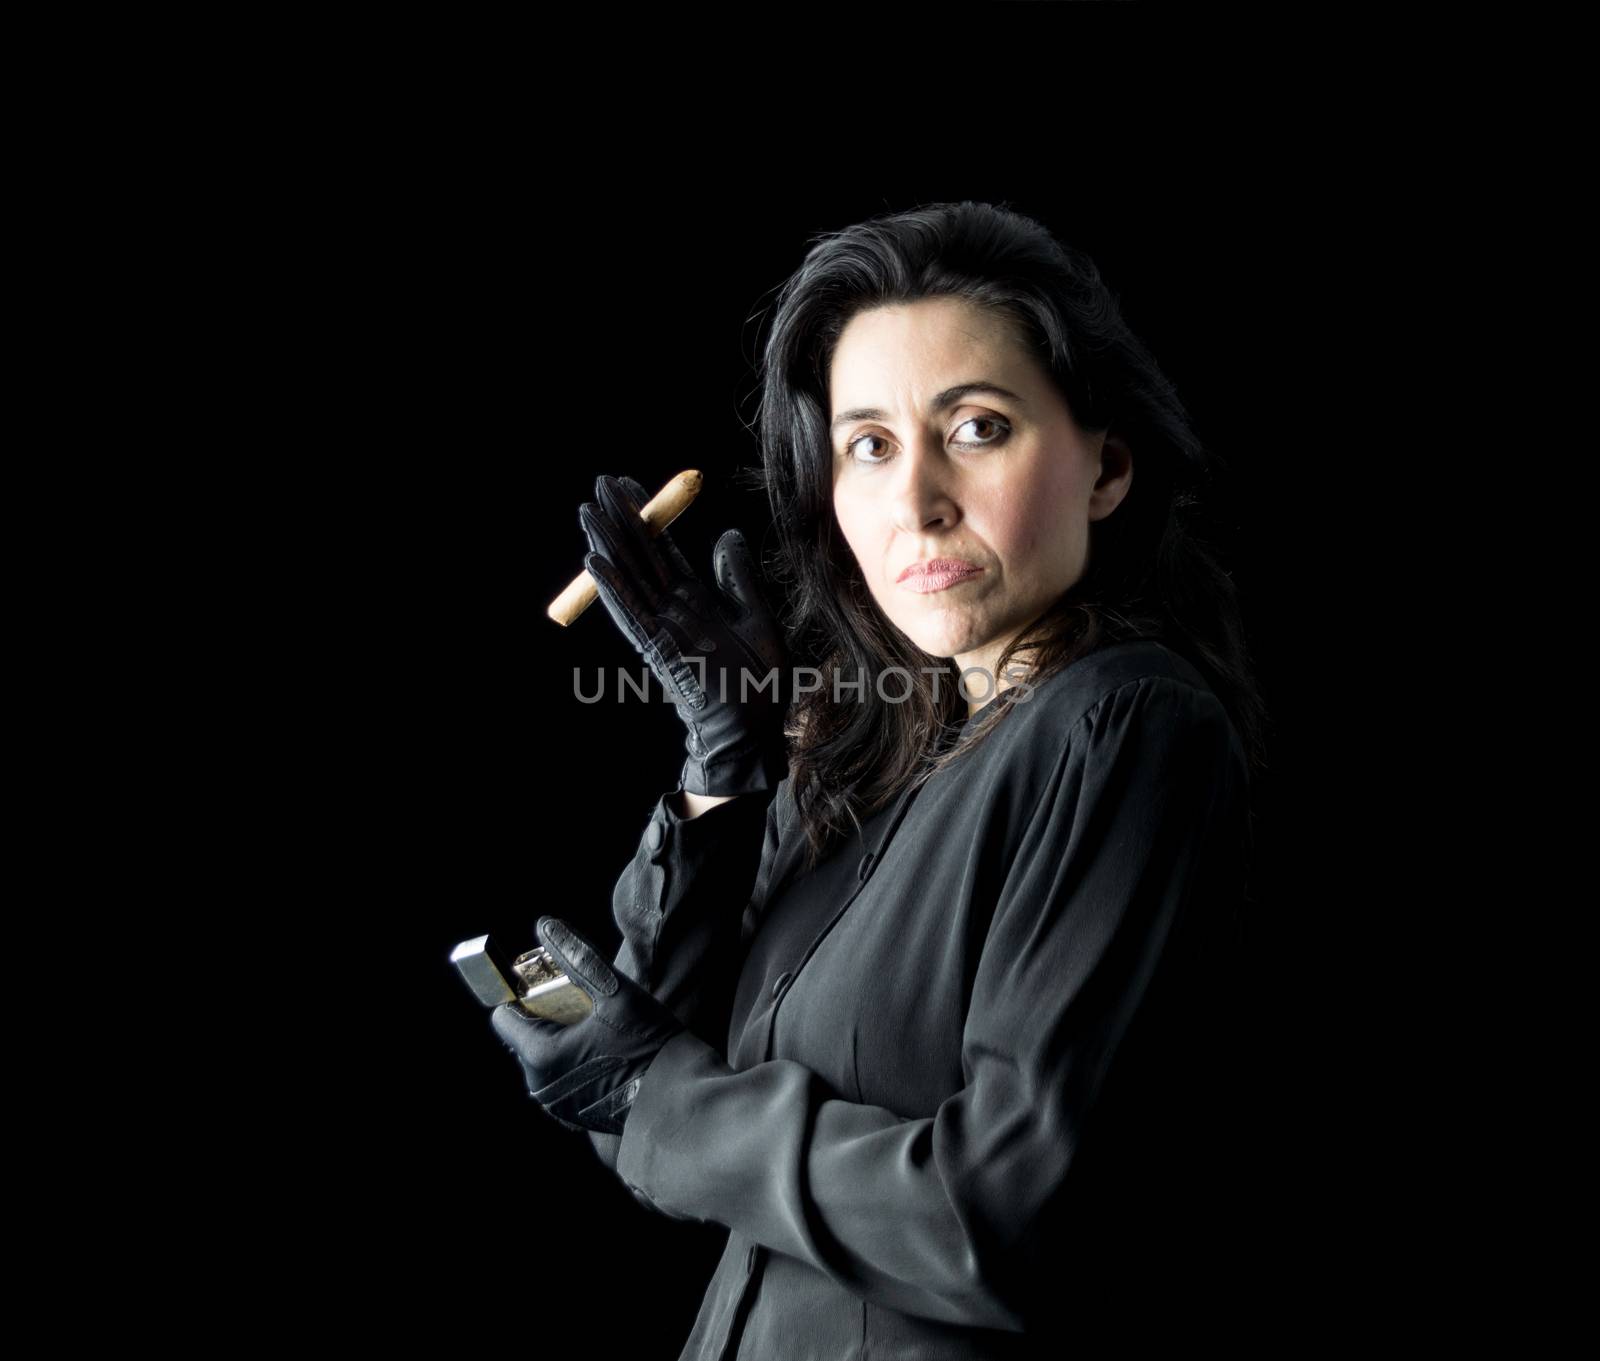 Brunette woman in black dress and black gloves standing in front of a black backdrop, holding a cigar in one hand and a lighter in the other and looking at the camera.